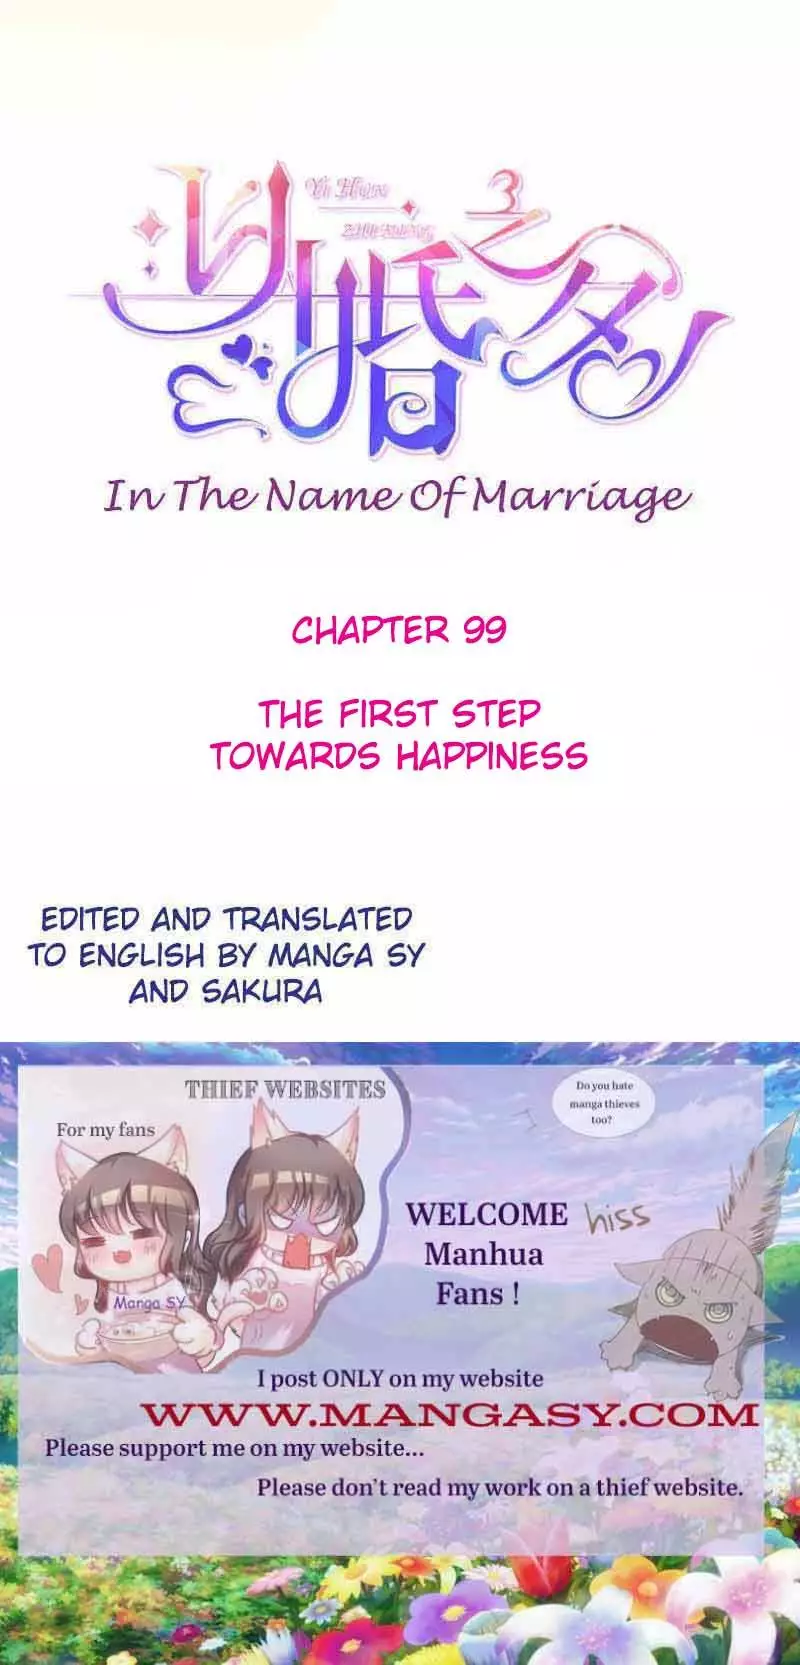 In The Name Of Marriage - 99 page 1-ef097f75